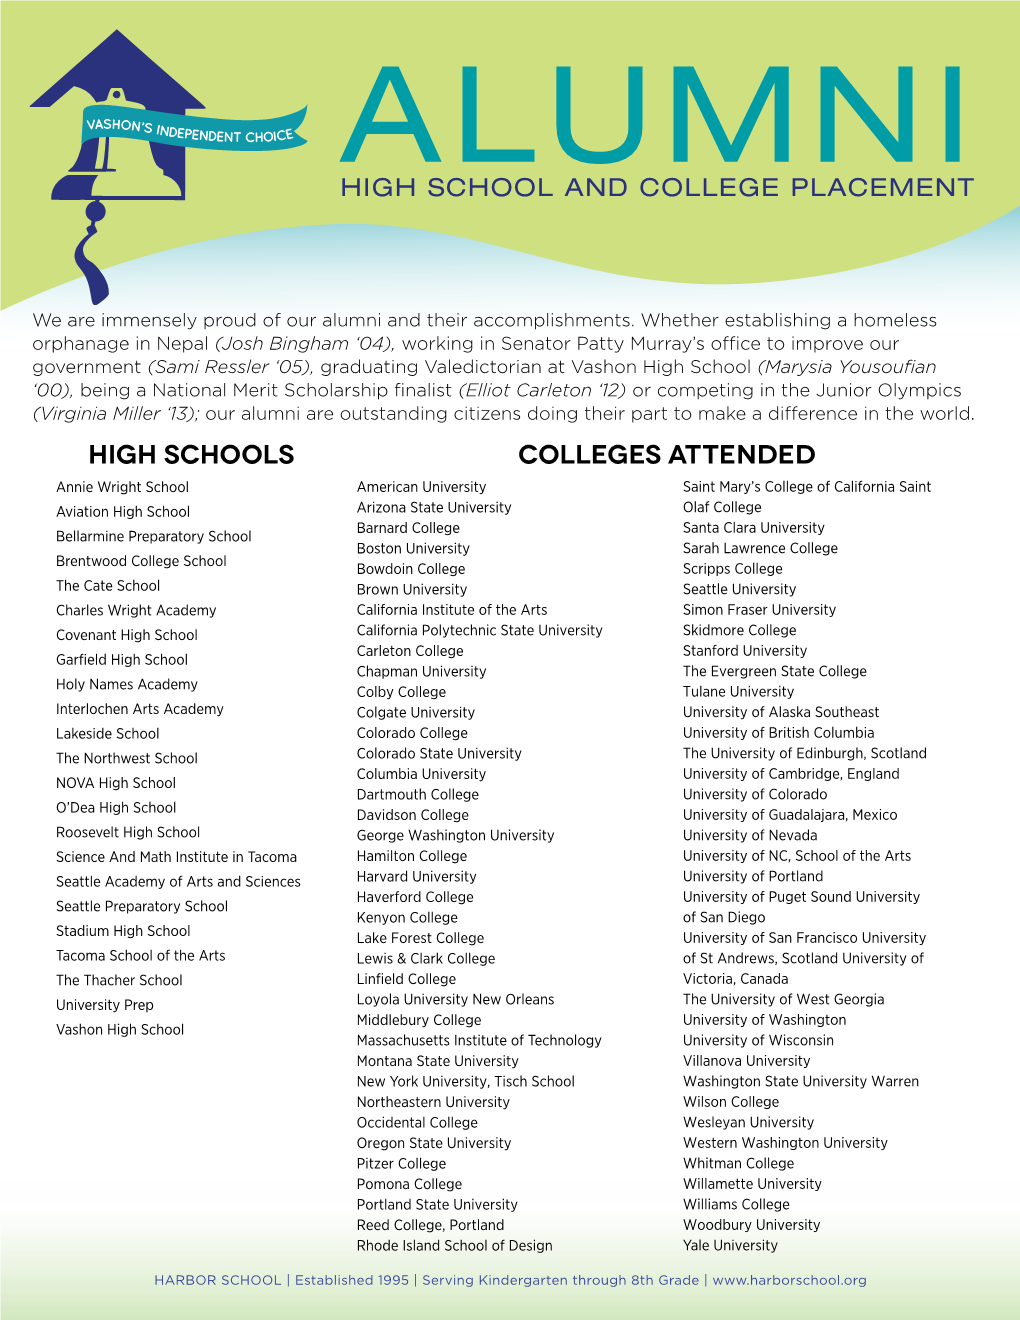 Colleges Attended HIGH SCHOOLS